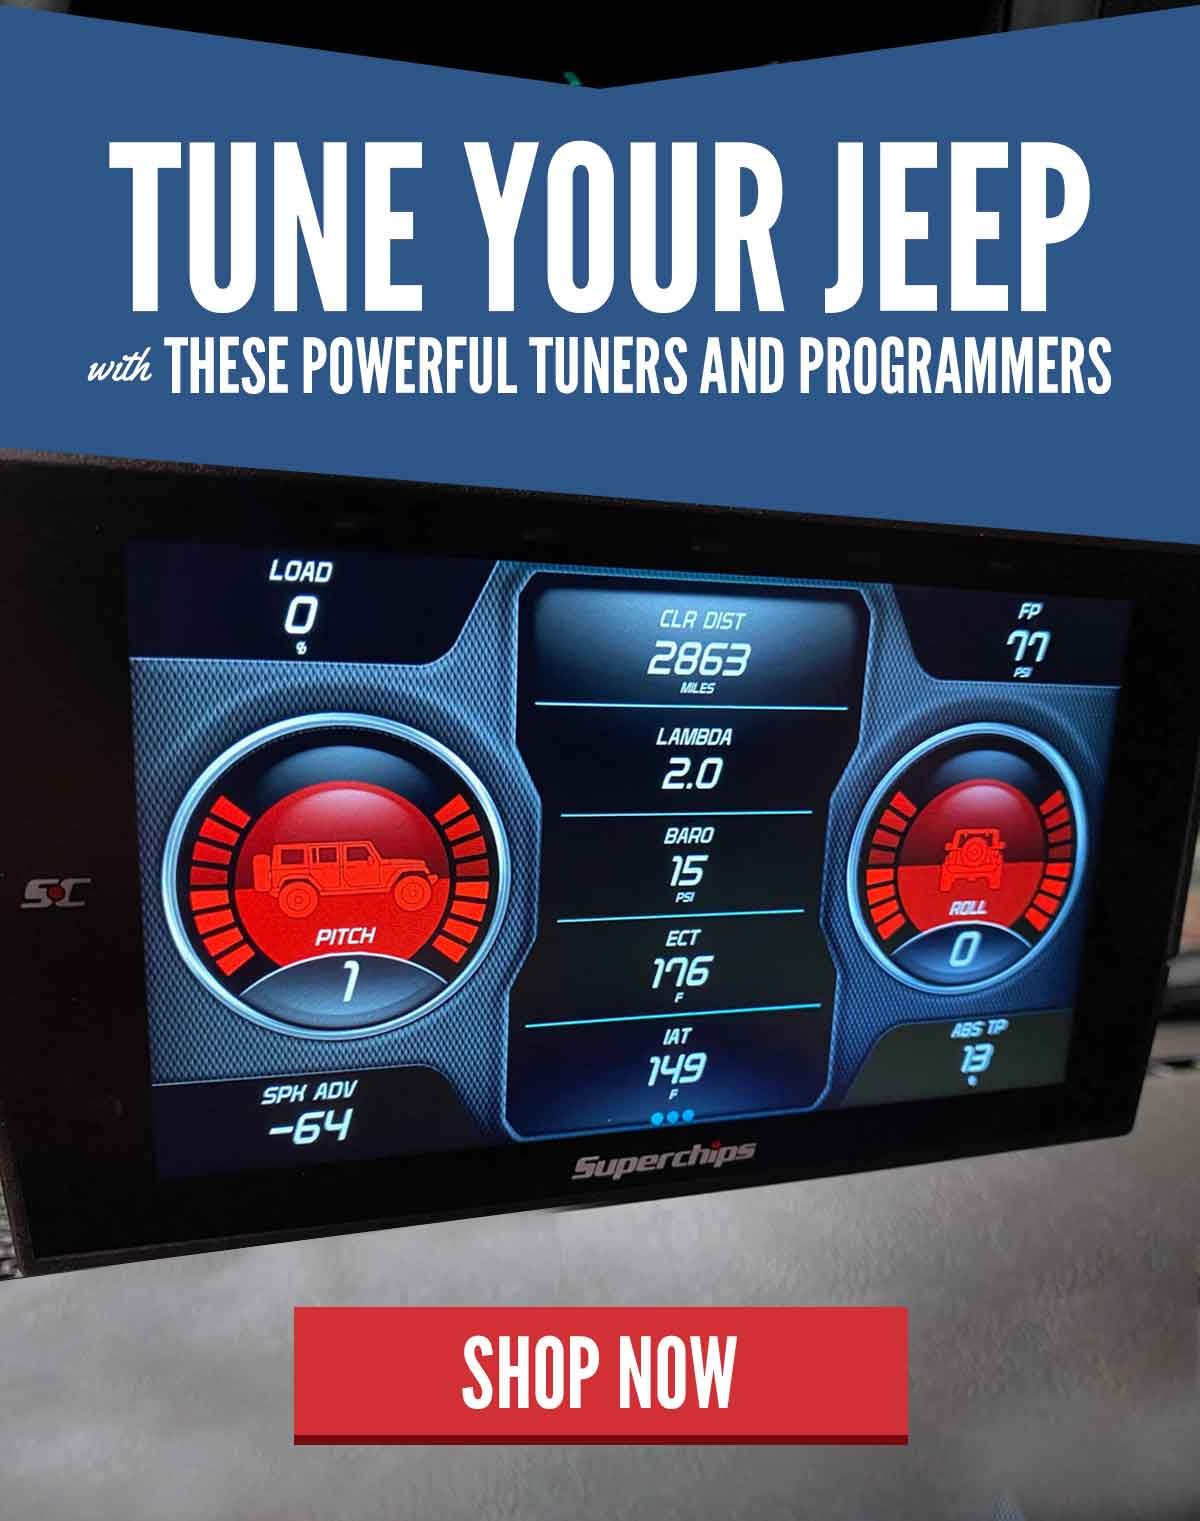 Tune Your Jeep With These Powerful Tuners and Programmers